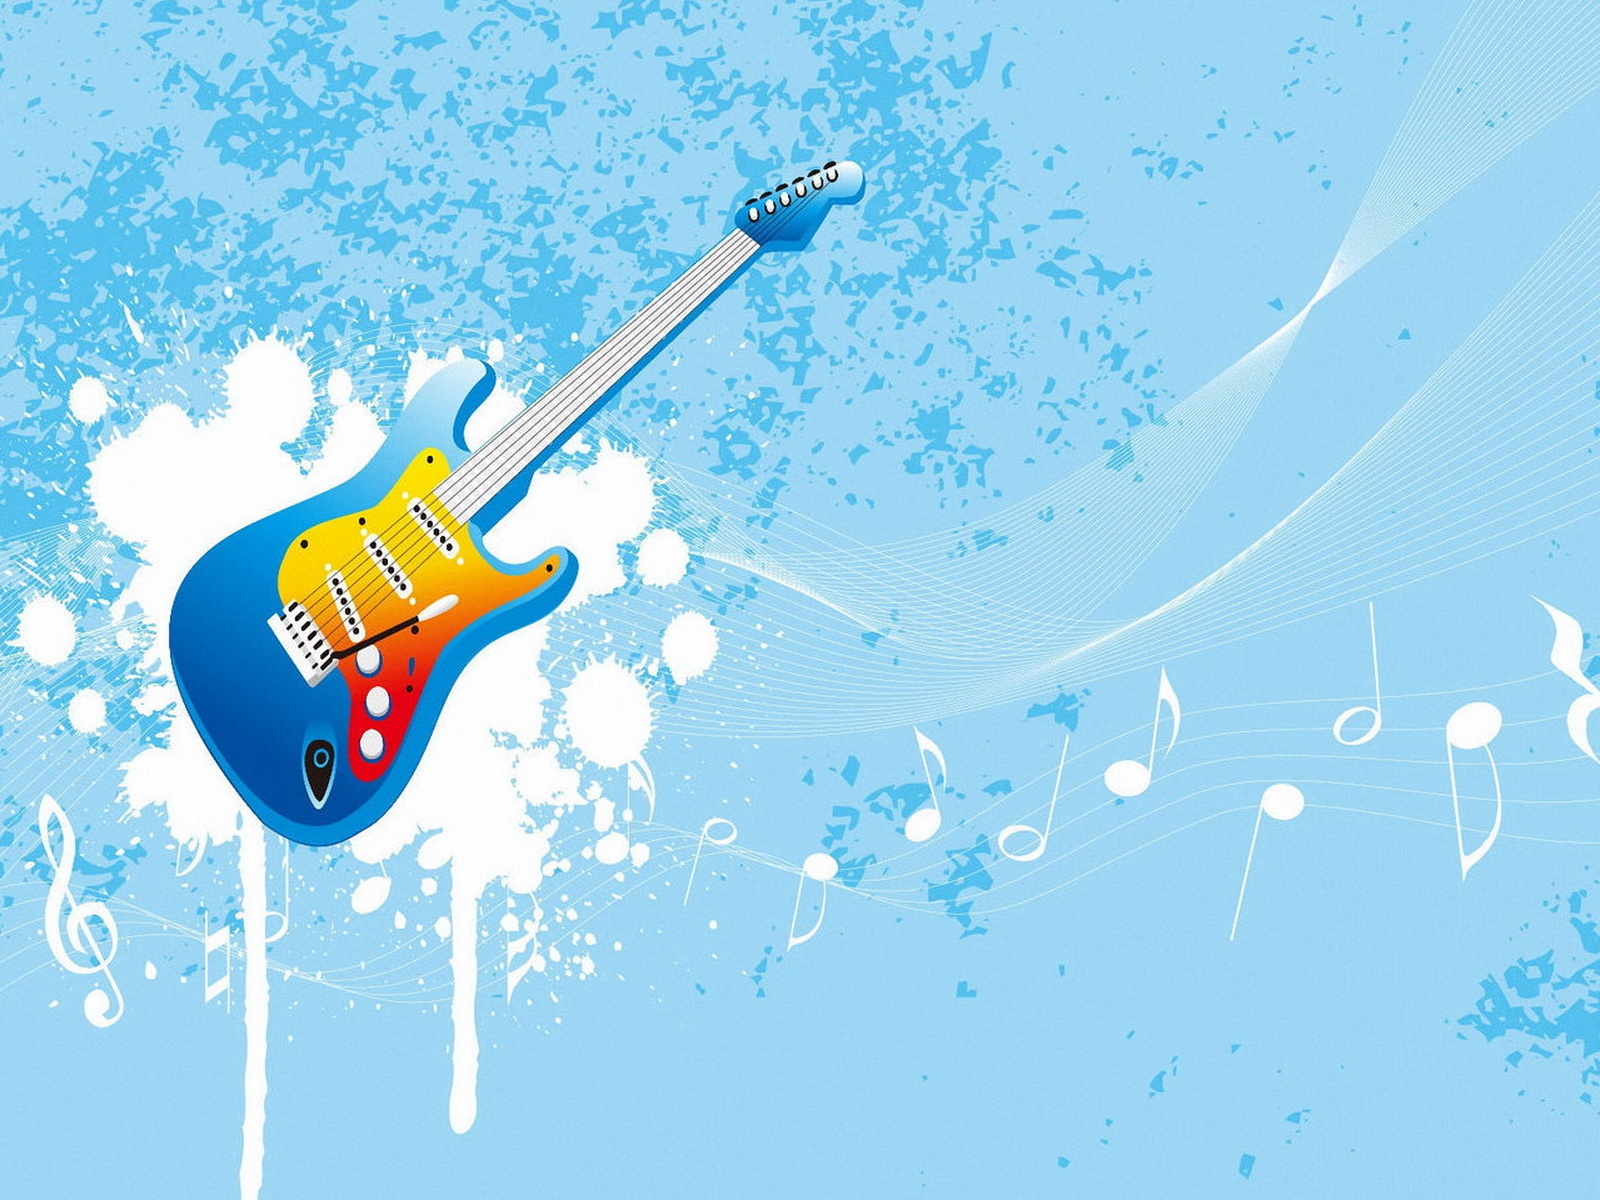 tools, music, guitars, pictures, blue iphone wallpaper